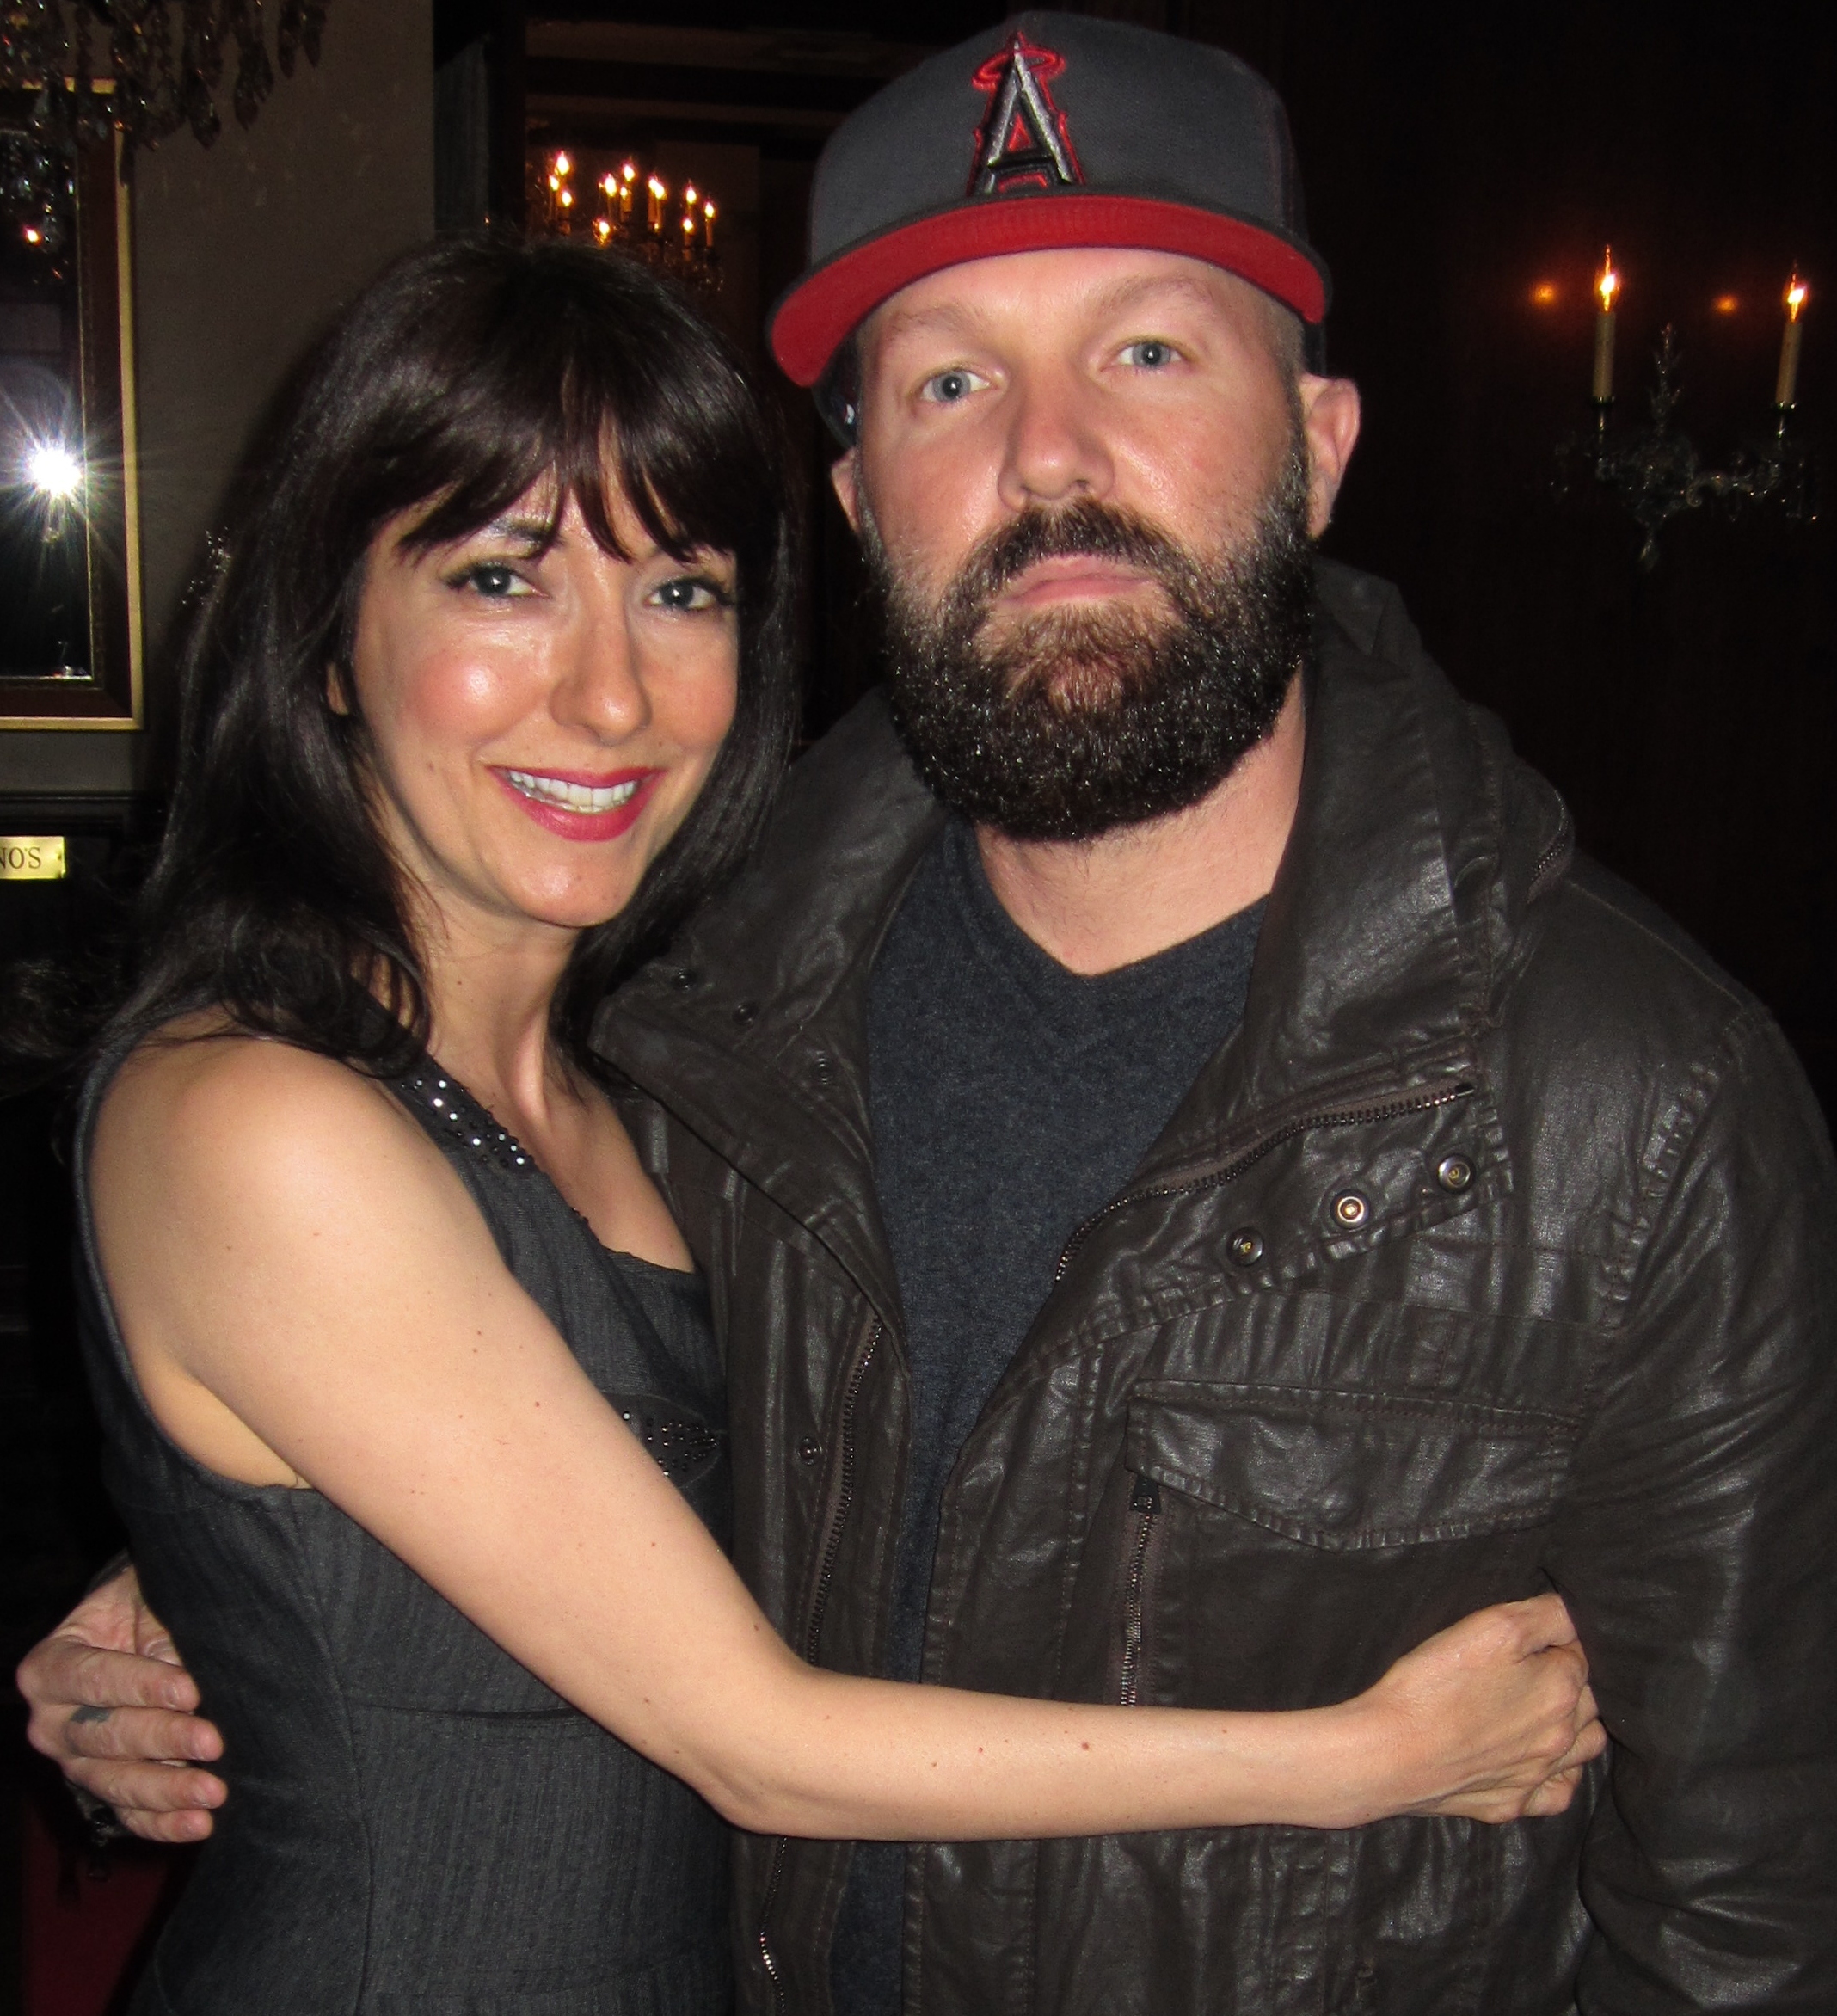 Luciana Lagana (who played the psychologist in the feature produced by Fred Durst Material World) with Fred at the movies premiere in Hollywood on 4/14/2013